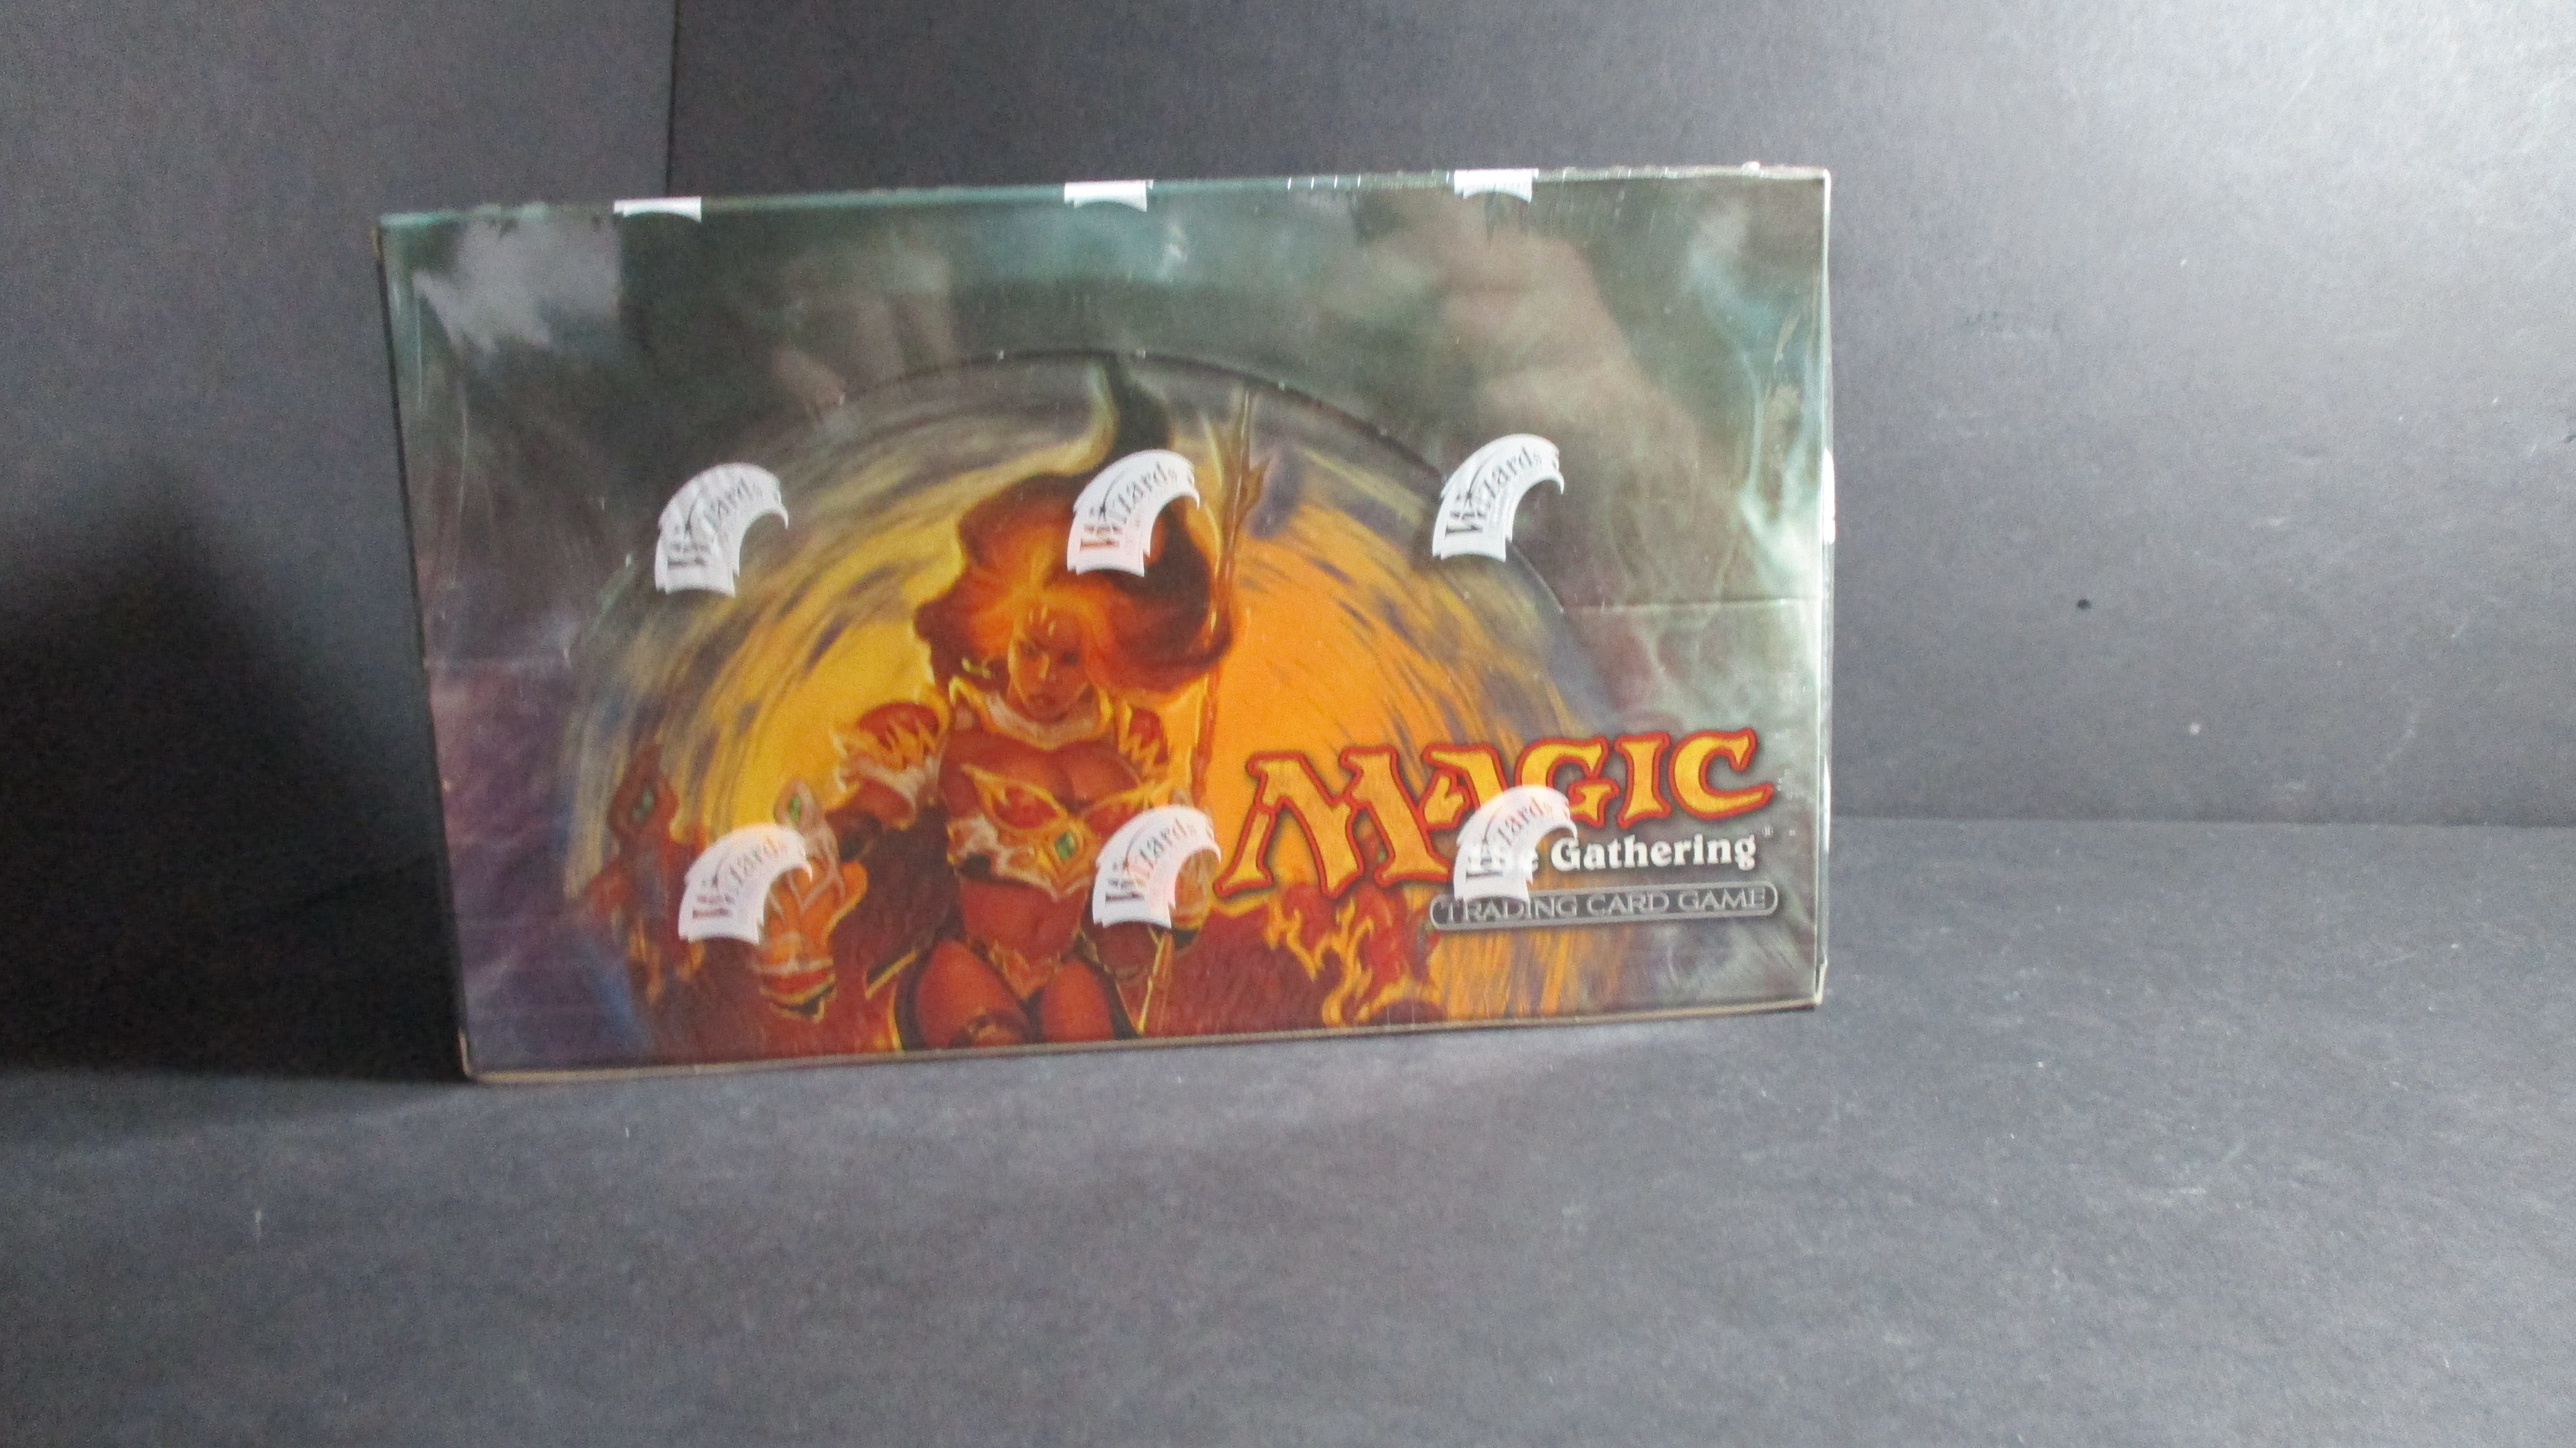 Planar Chaos Booster Box SEALED